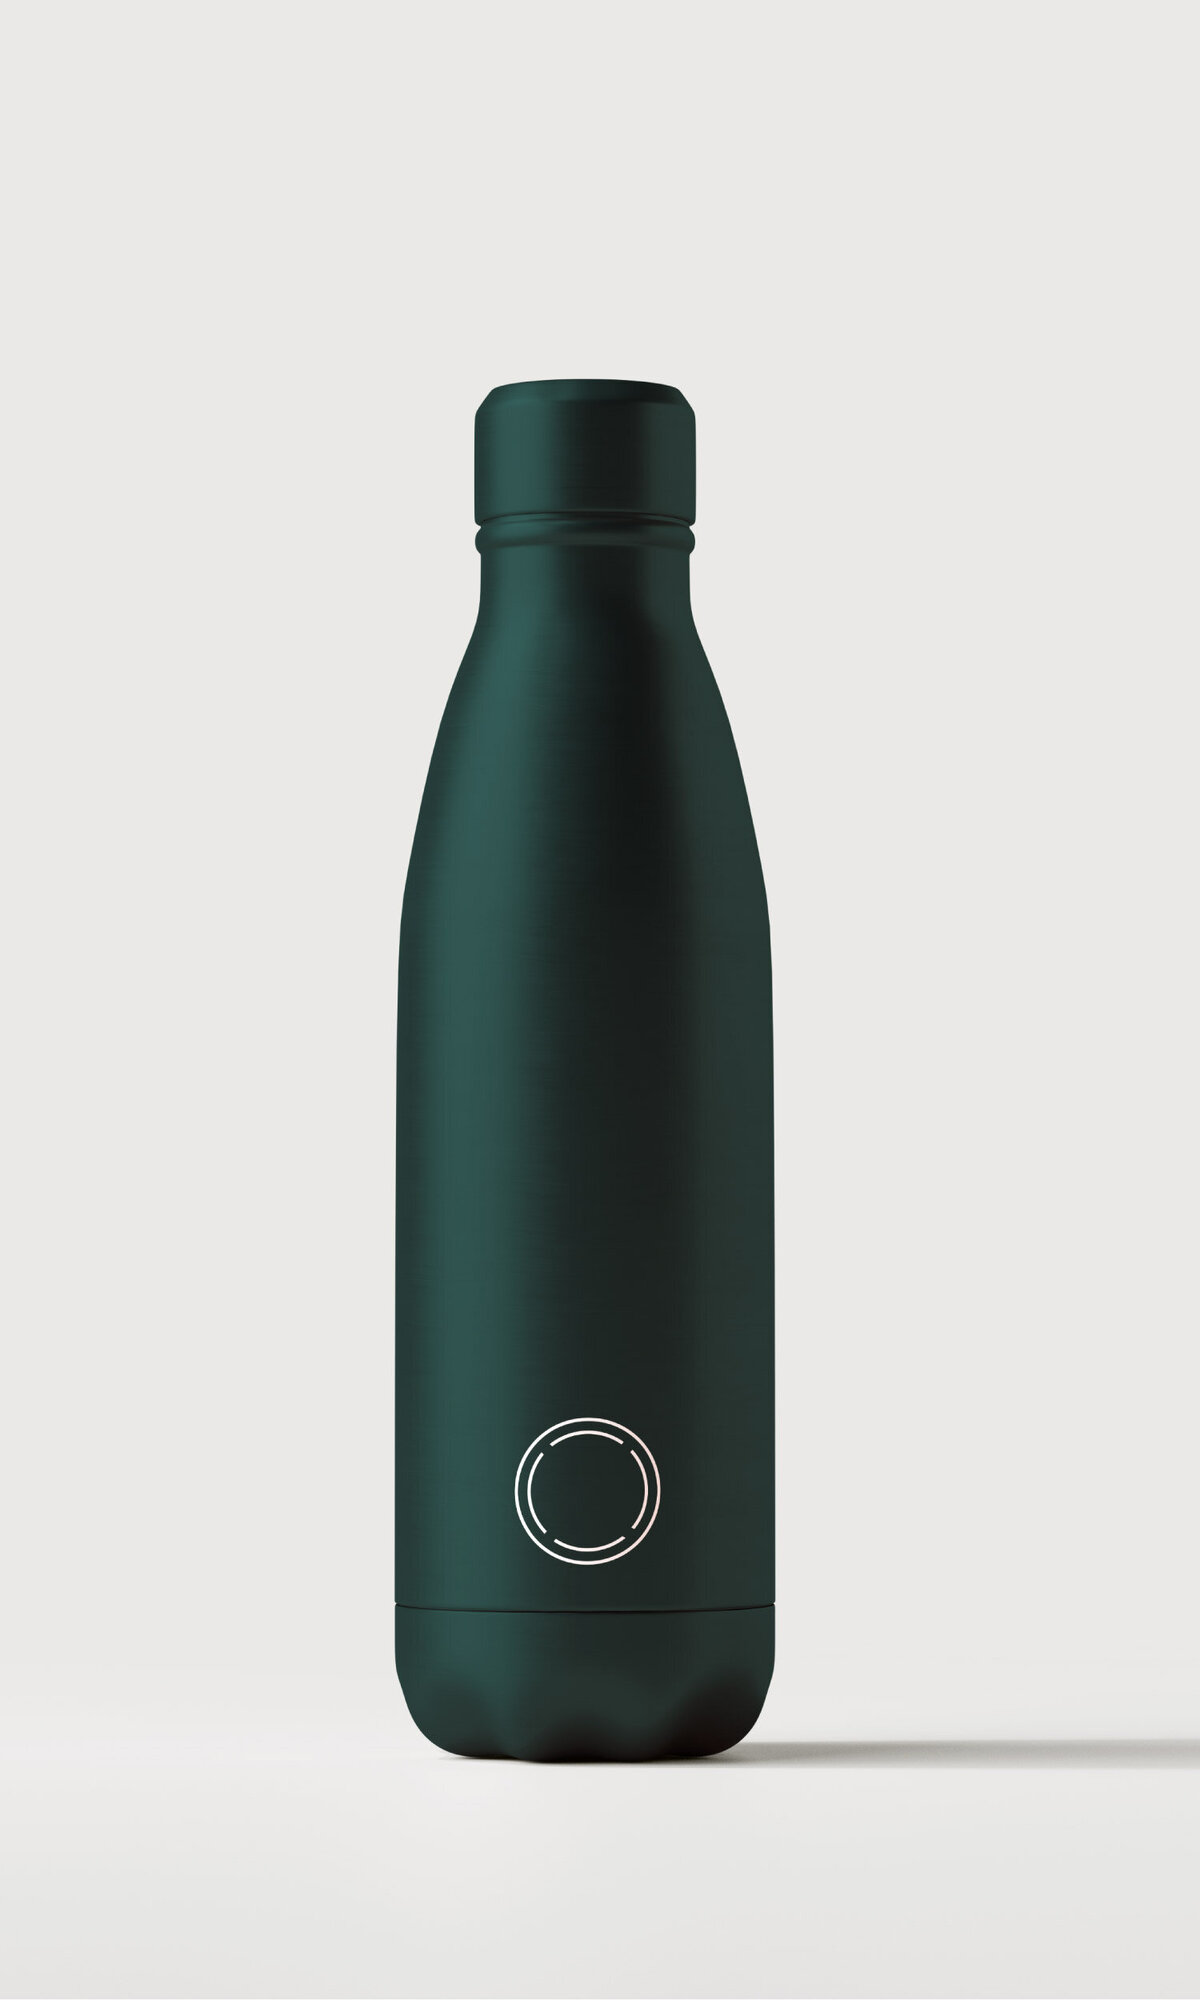 A mockup of the Rosie Moore brand mark on an aluminum bottle